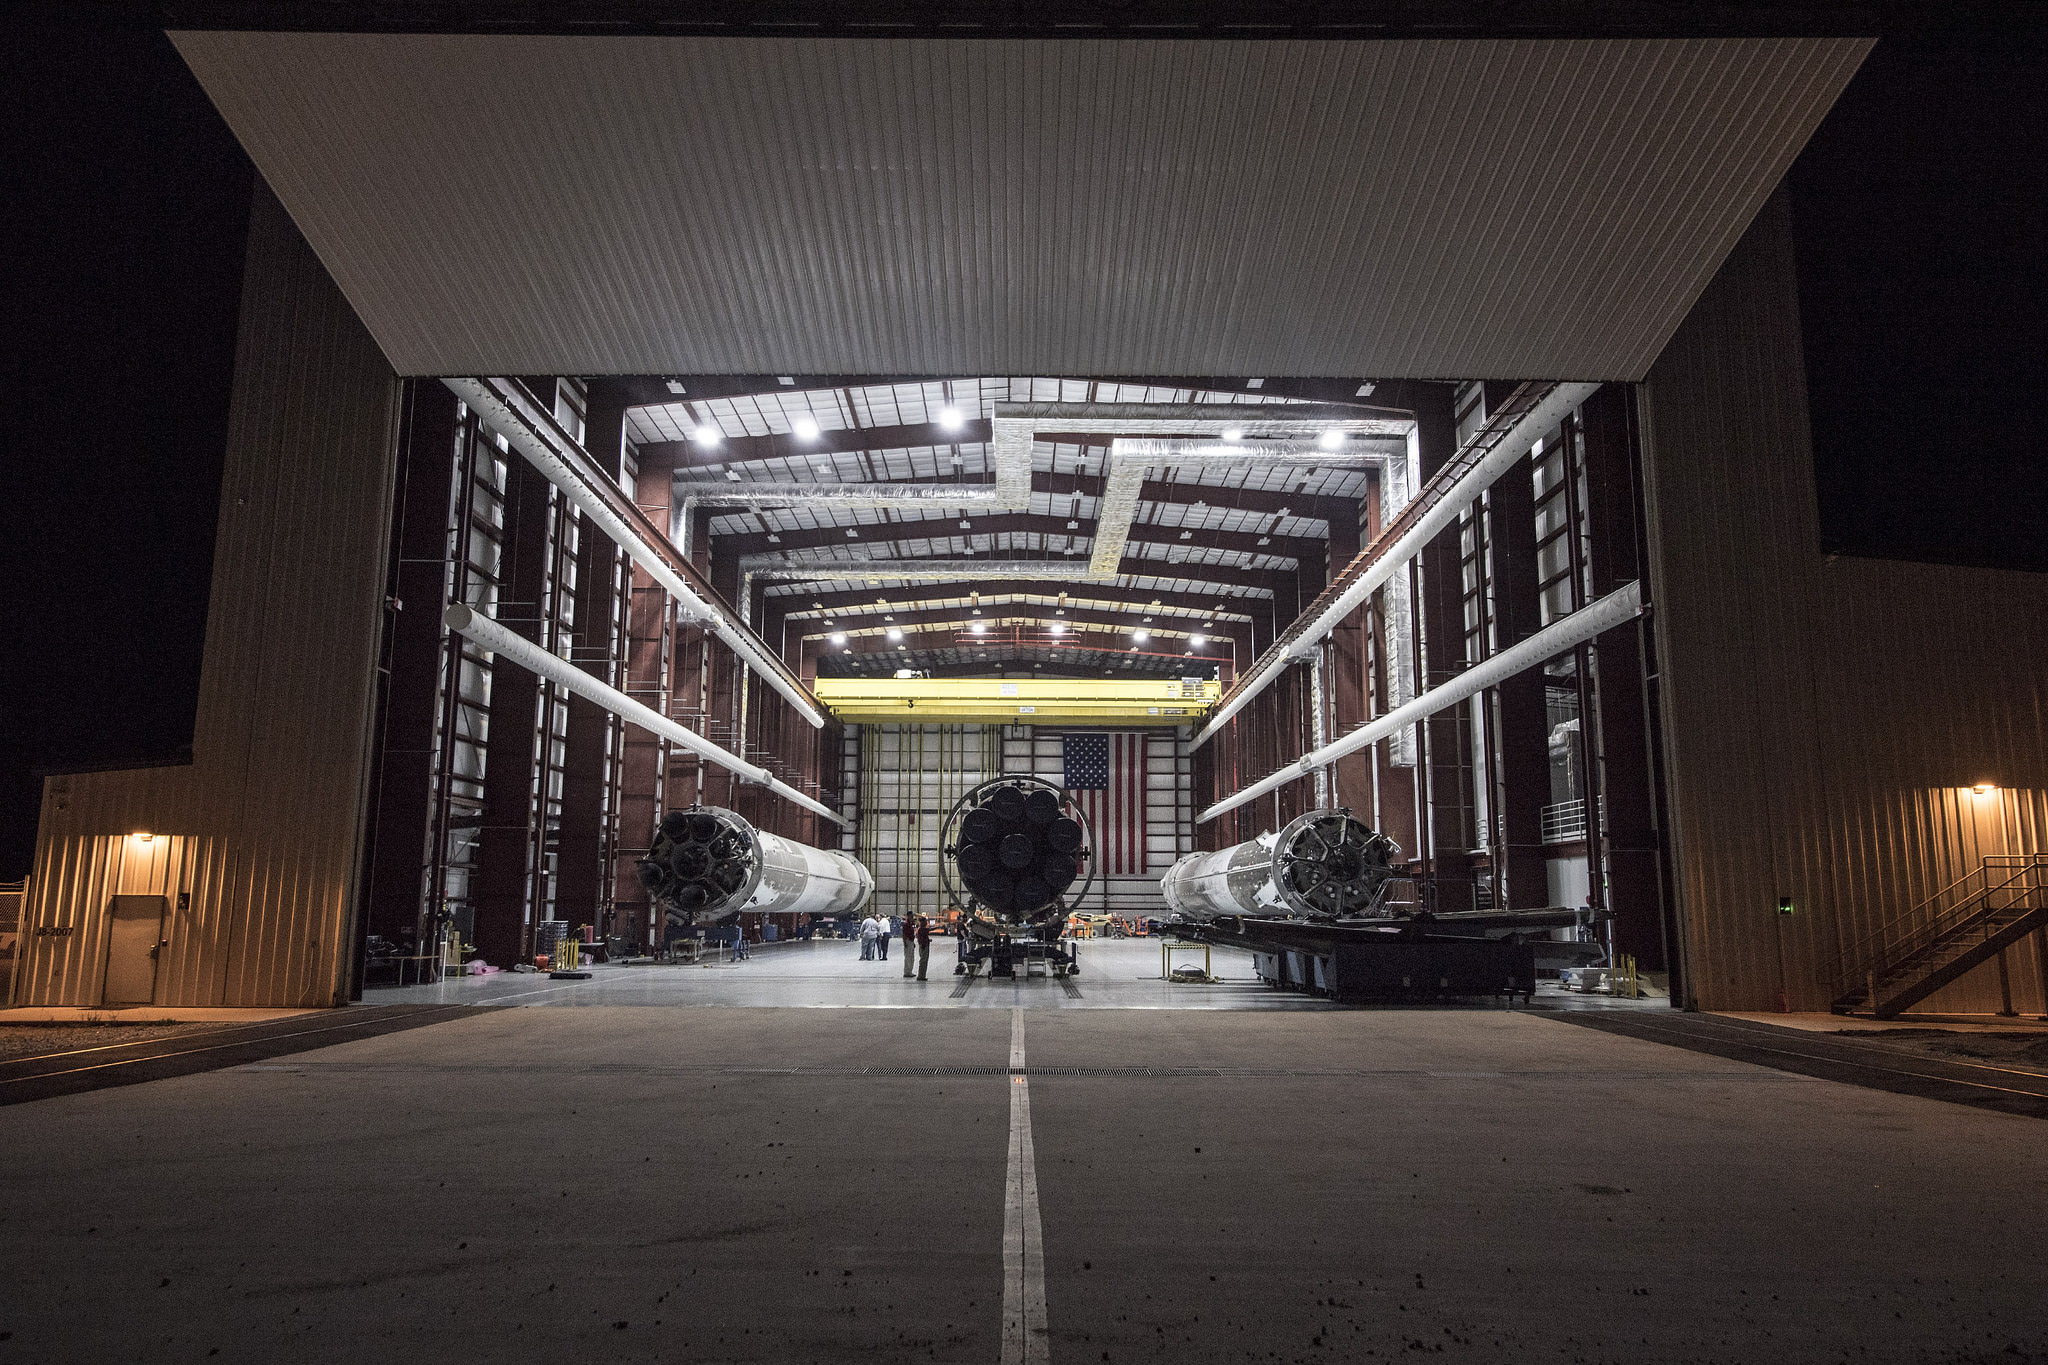 3 landed SpaceX rockets in hangar at pad 39A at the Kennedy Space Center, Florida.  Credit: SpaceX